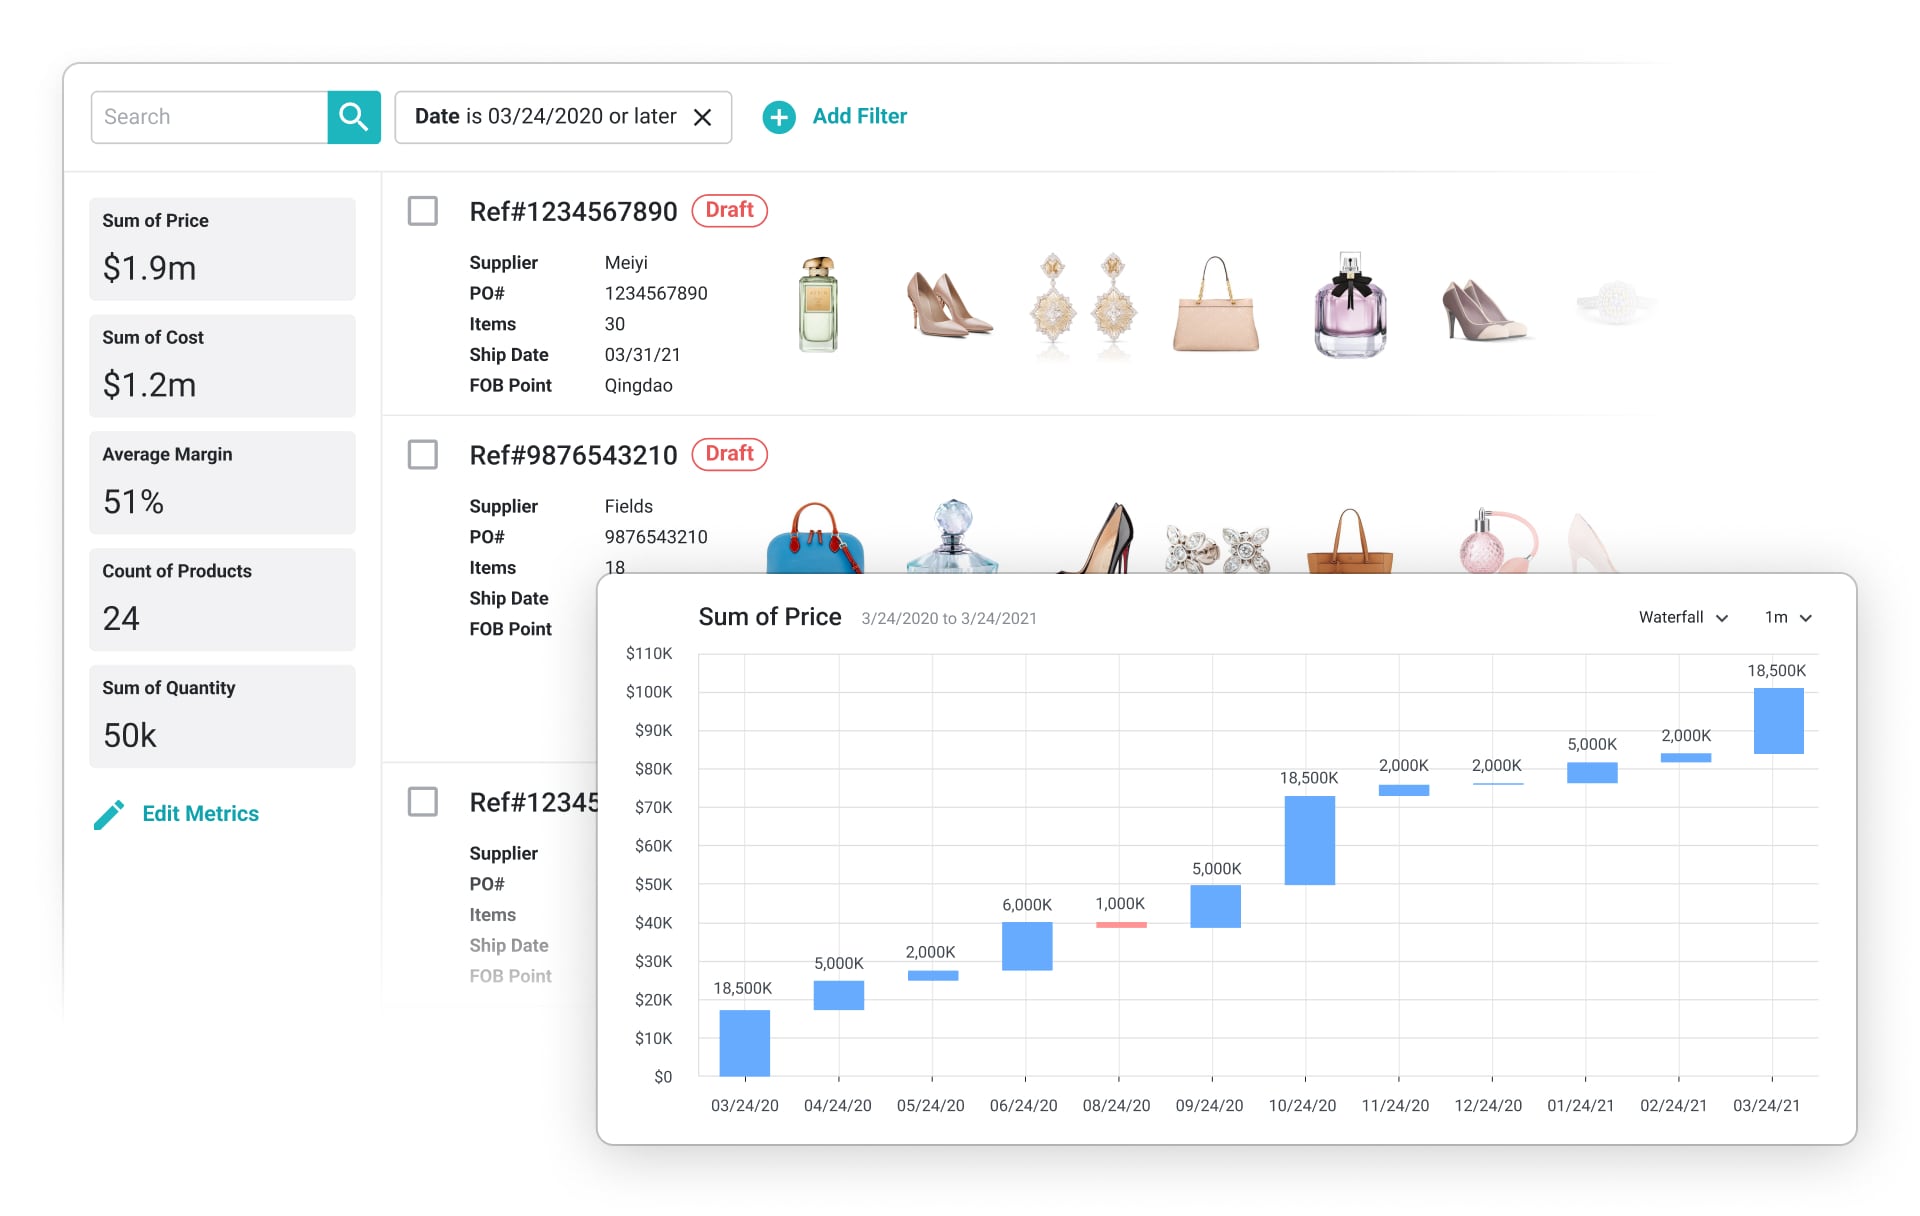 Better luxury goods and jewelry business insights are possible when you use Surefront software